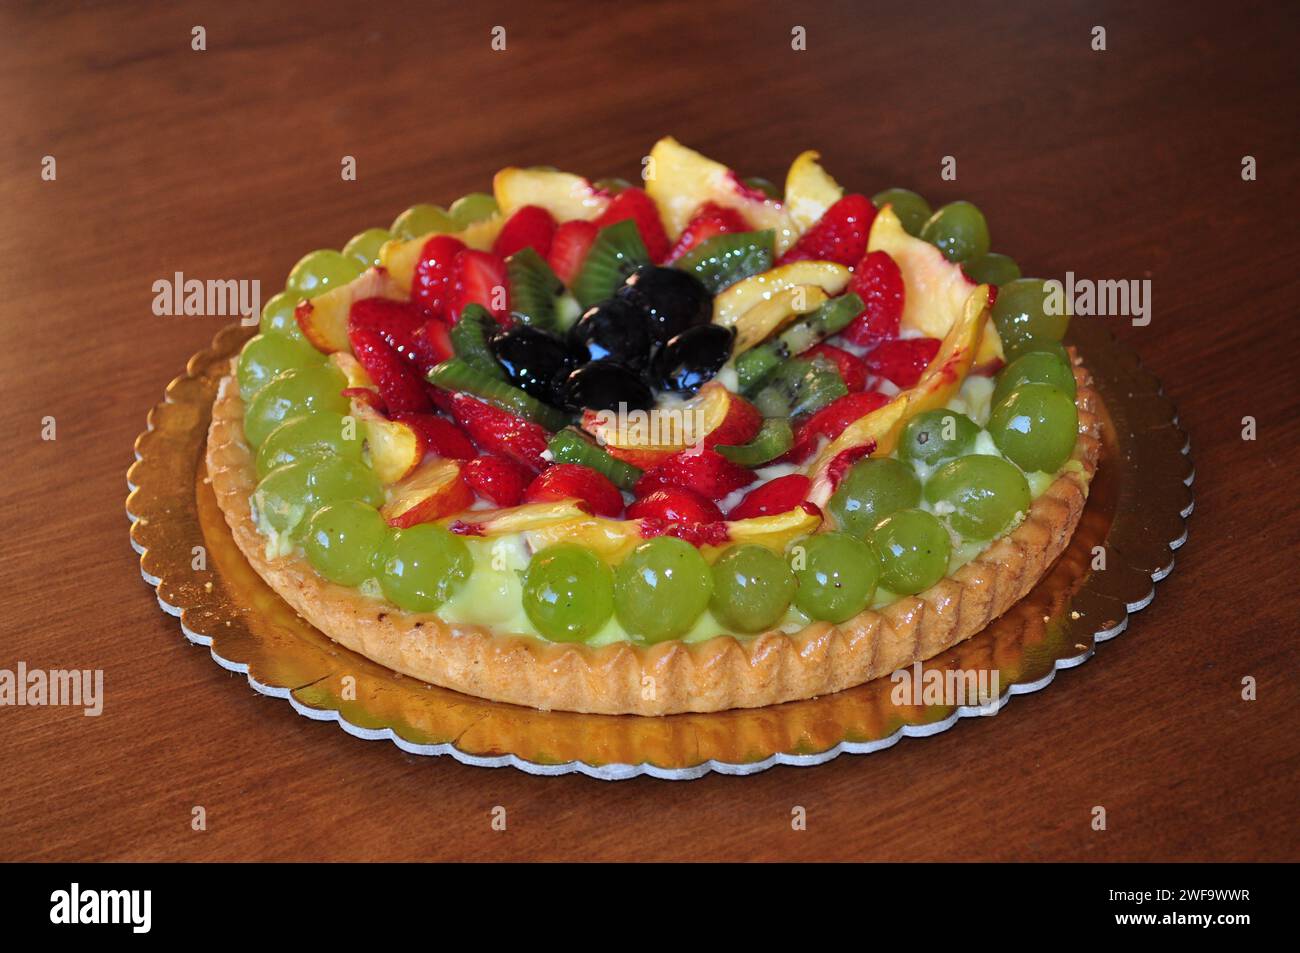 Cake of fruits and cream for Name Day, in Summer, In Italy Stock Photo